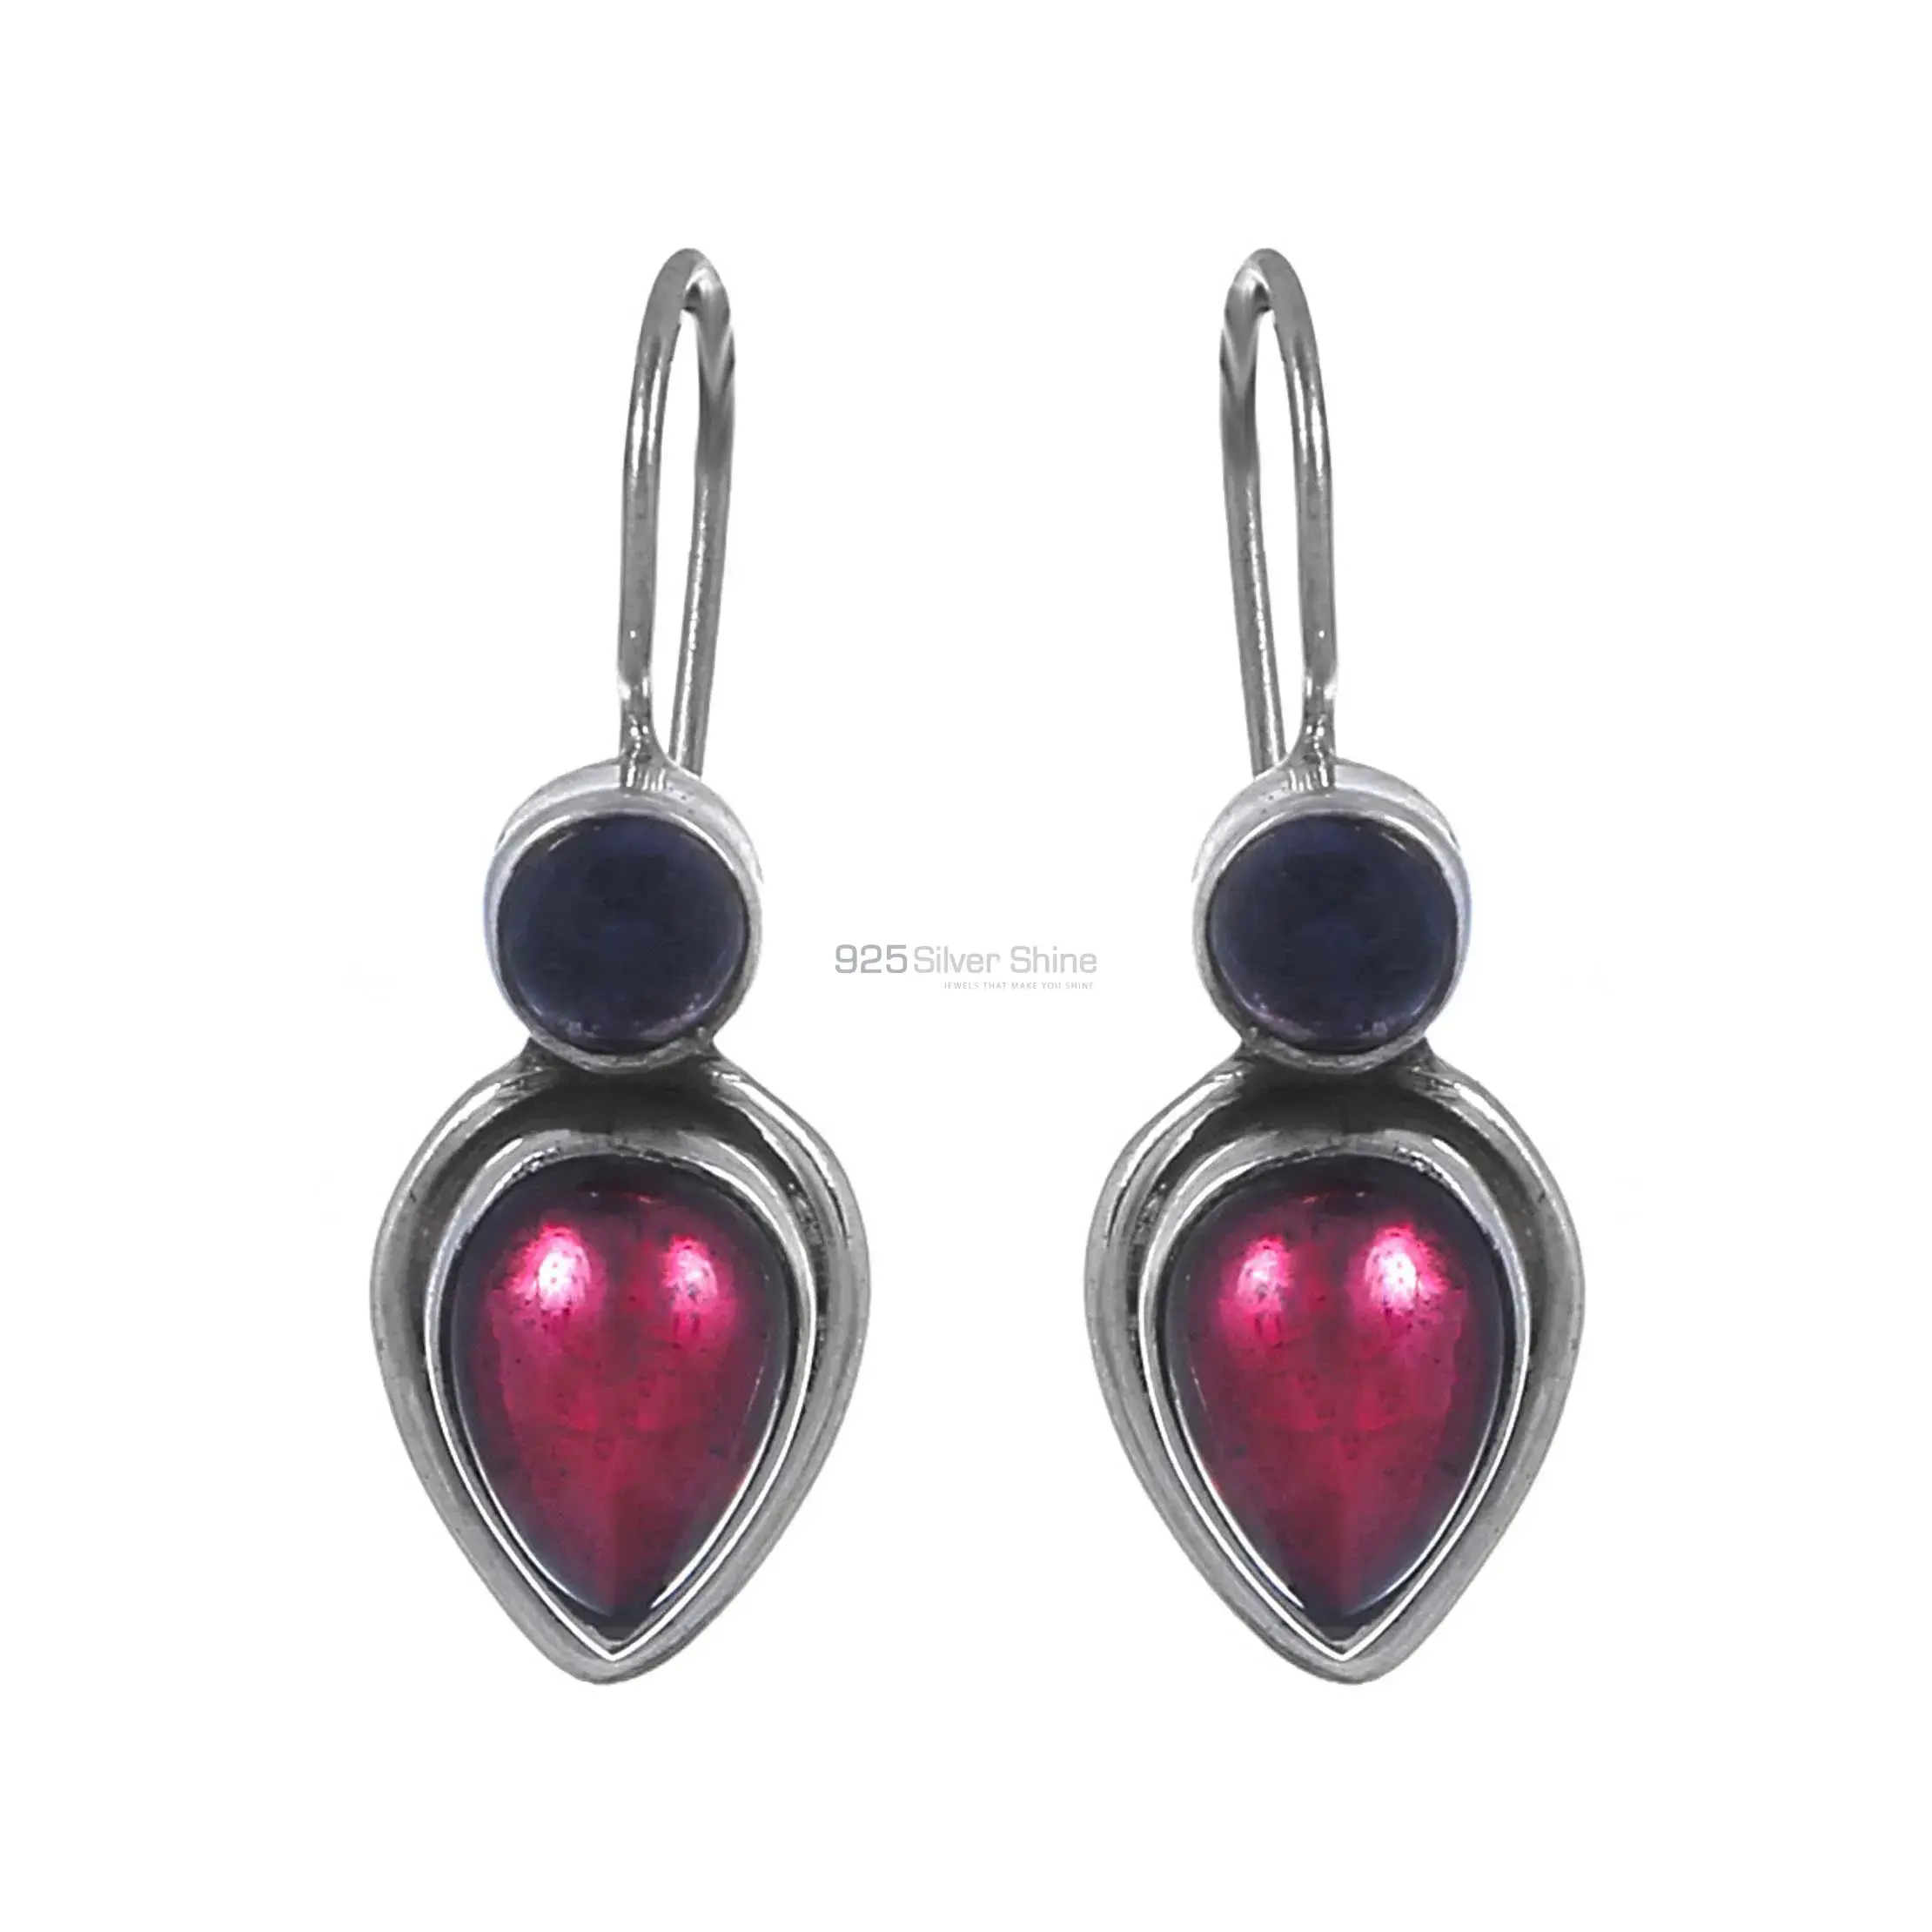 Wholesale Natural Semi Precious Gemstone Earring In Sterling Silver Jewelry 925SE202